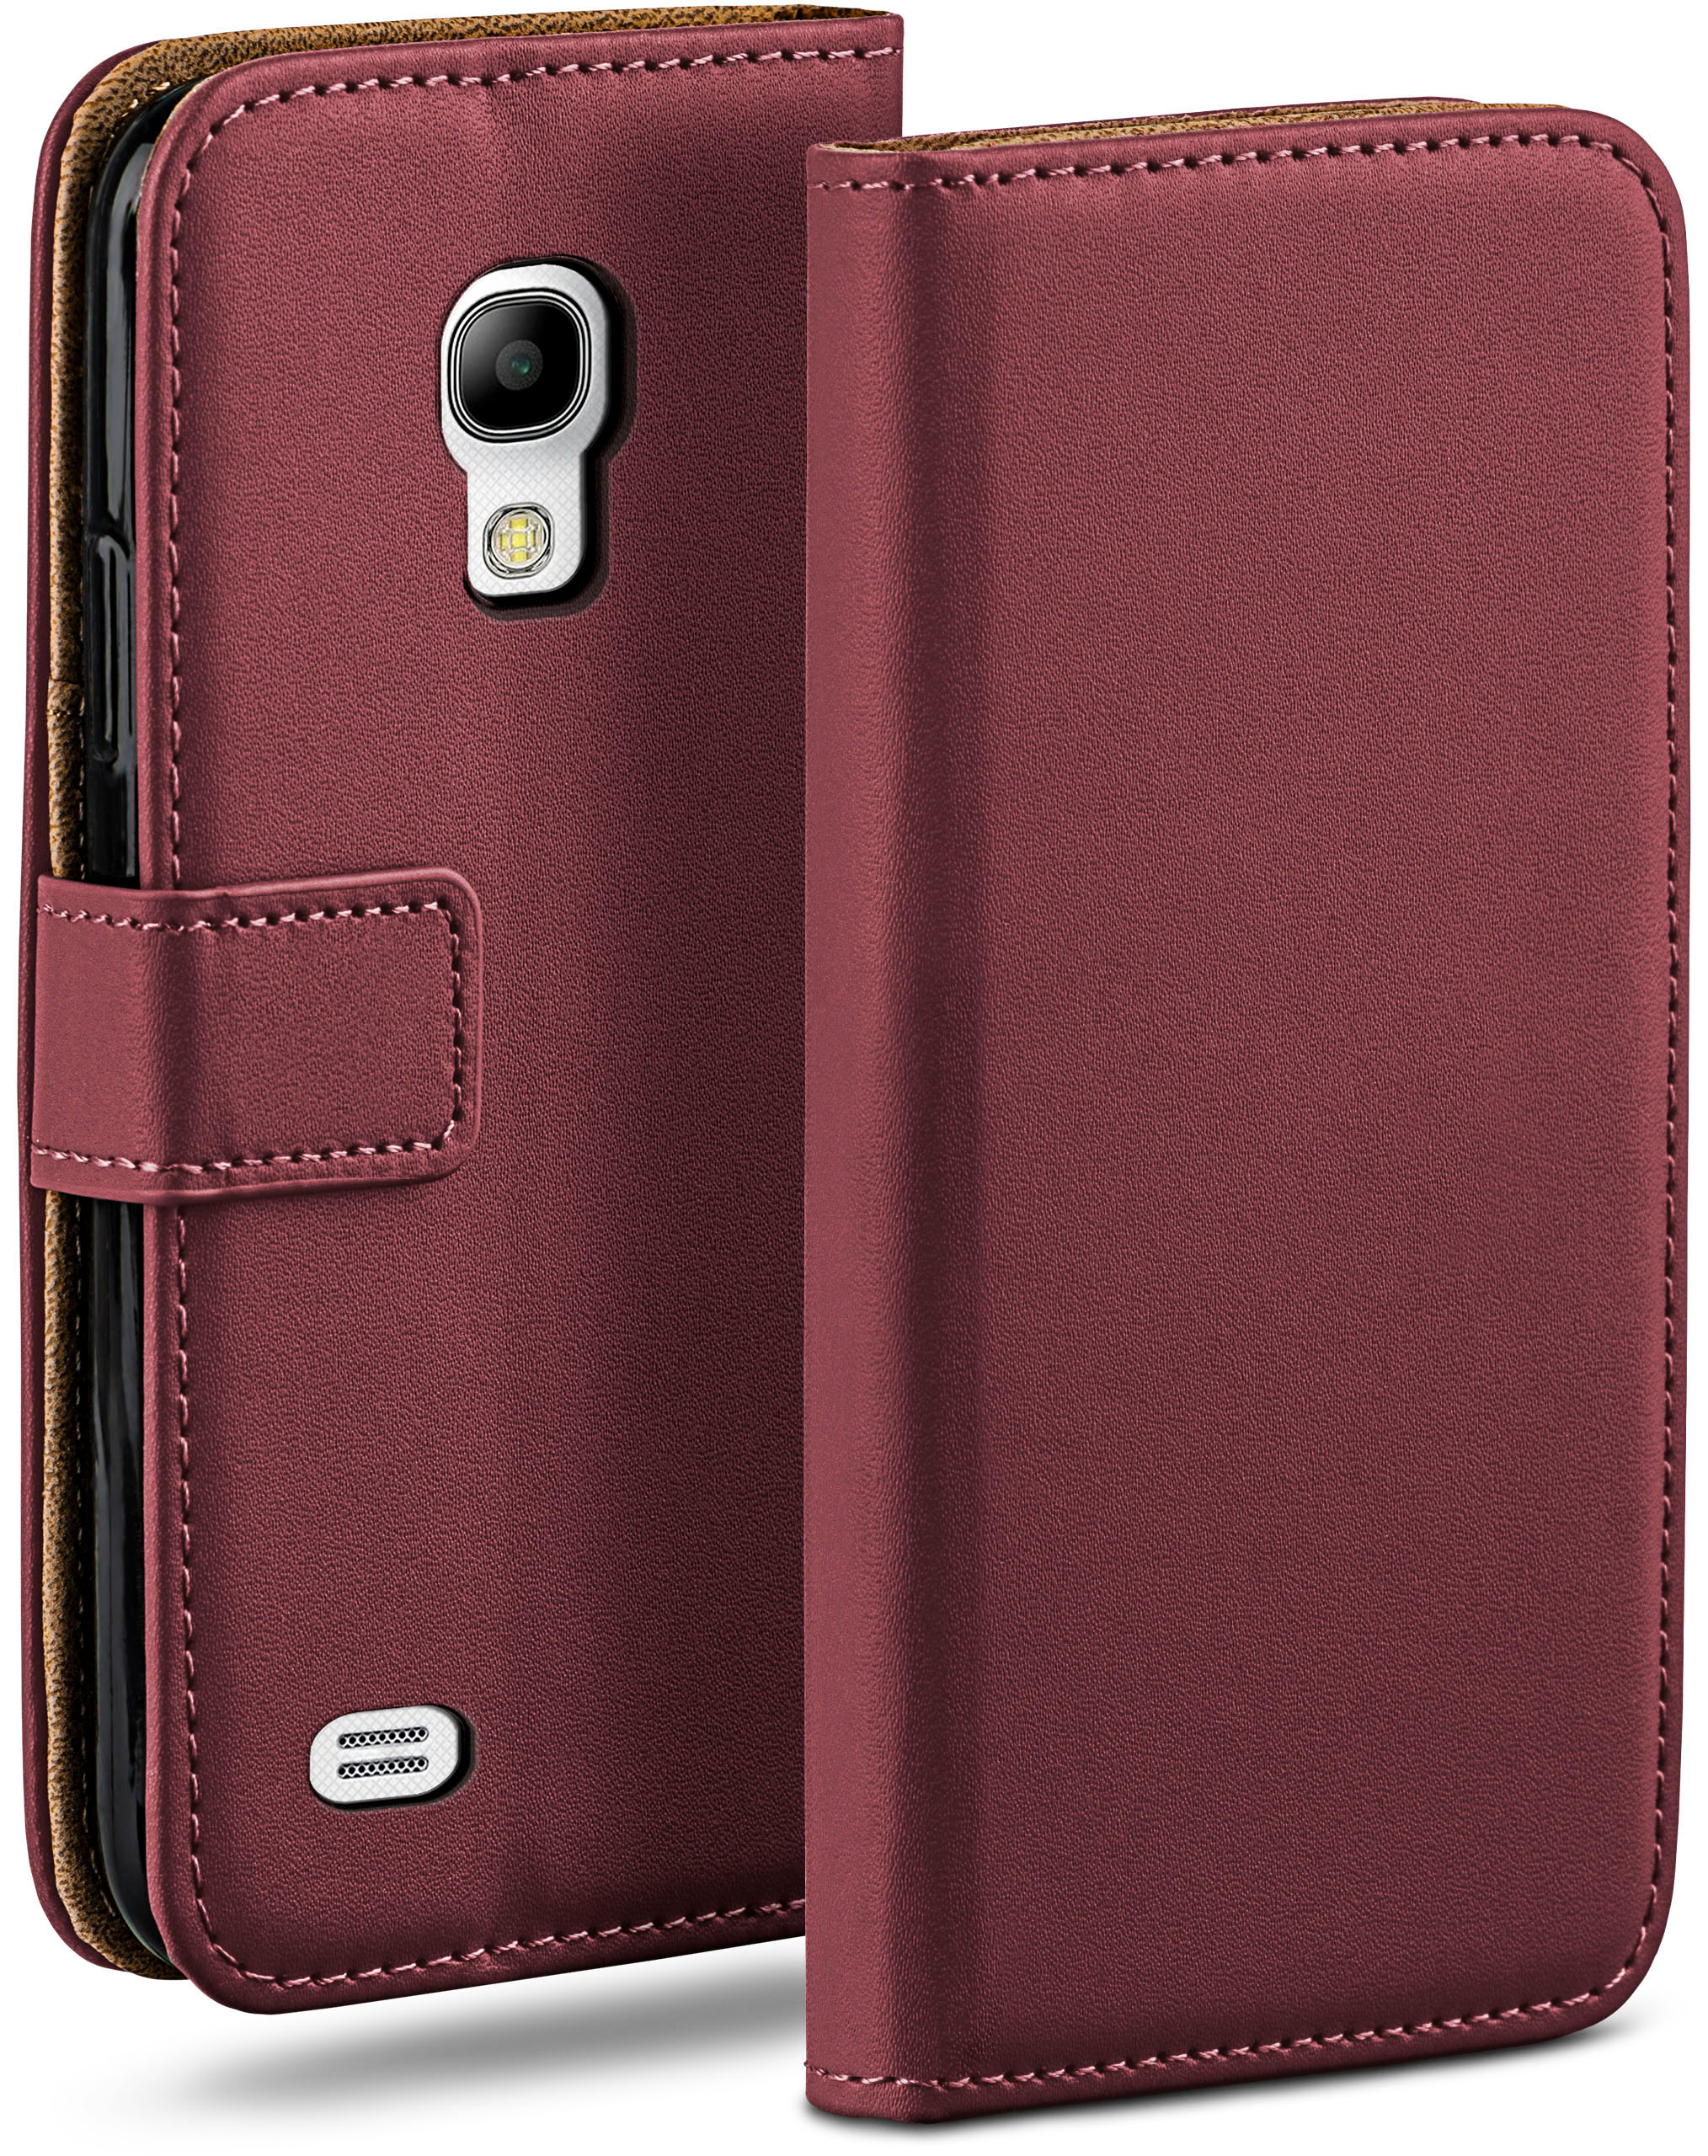 S4, Maroon-Red Galaxy MOEX Book Samsung, Bookcover, Case,